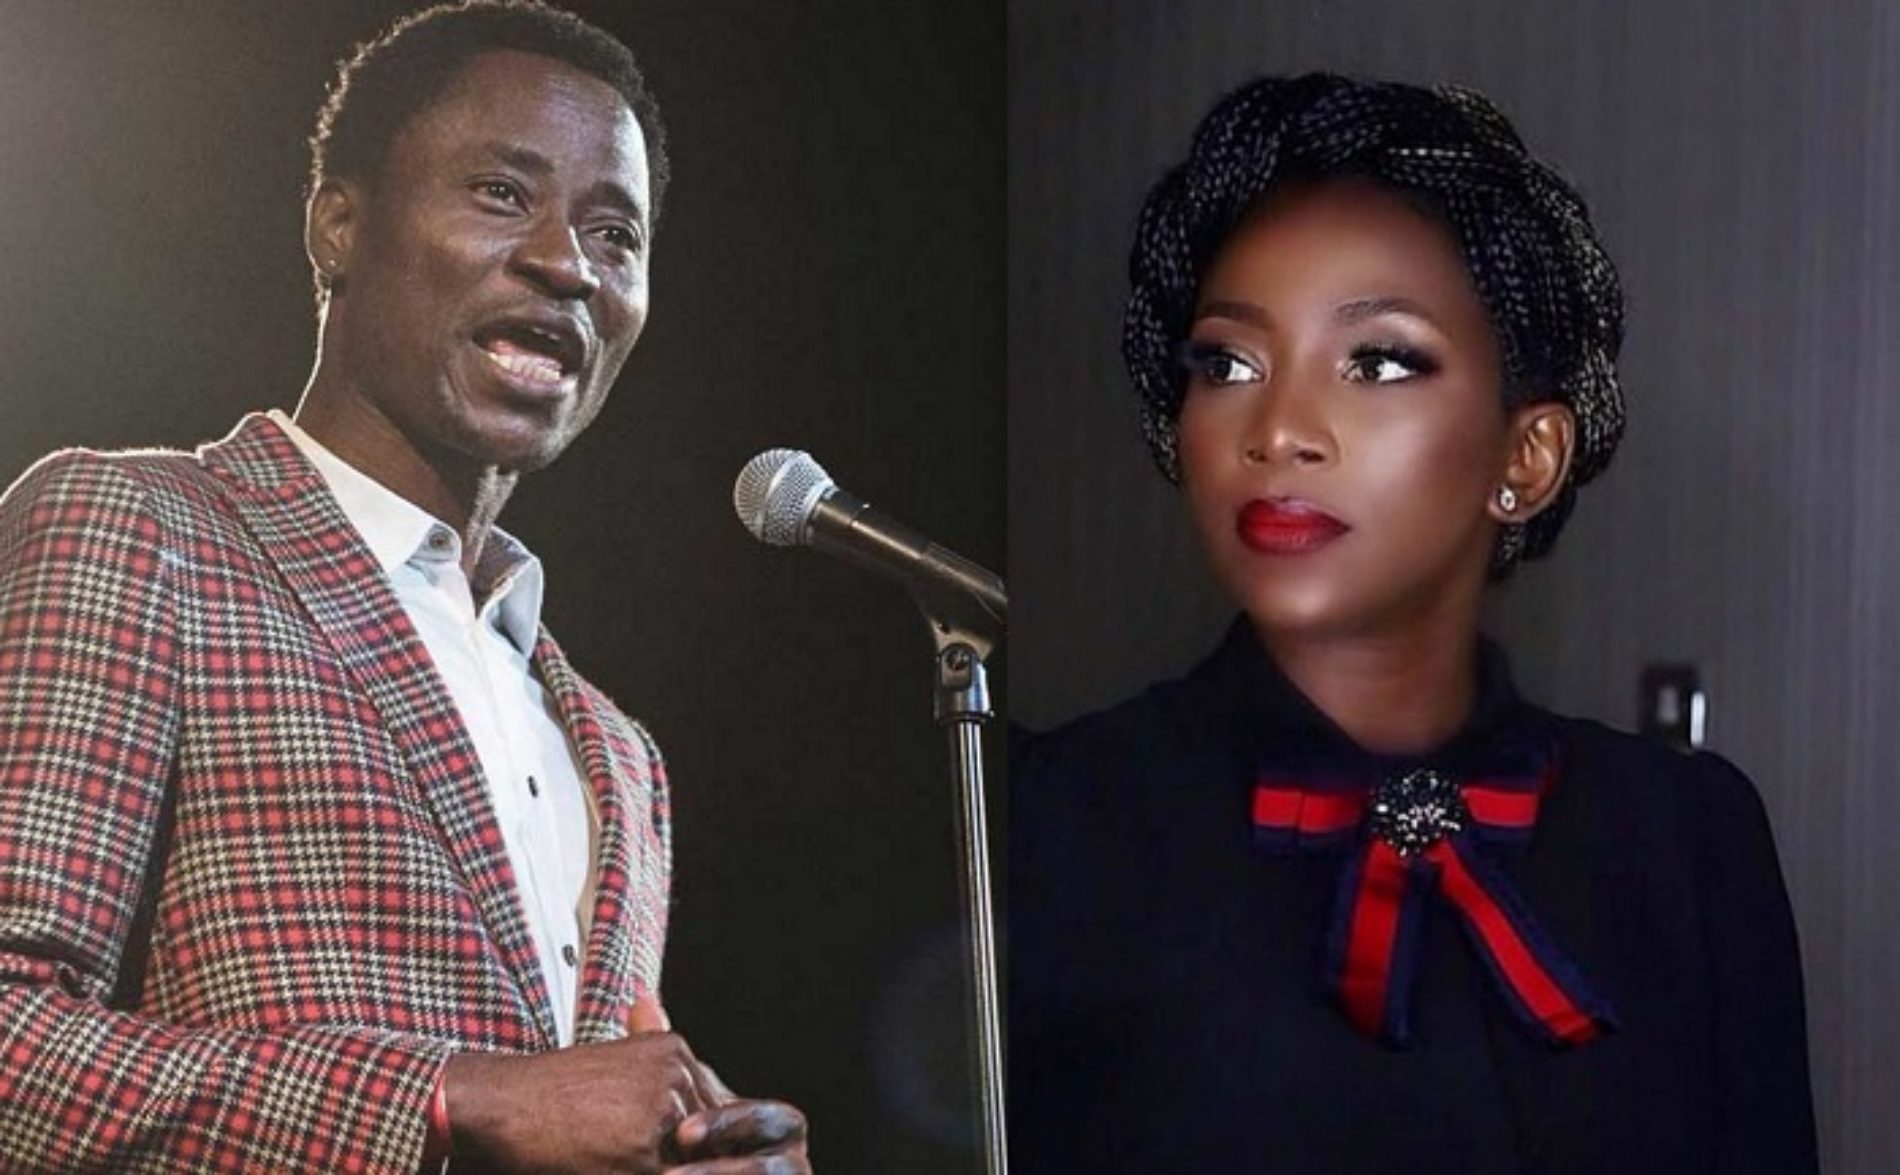 Bisi Alimi slams Nigerian actors, says Genevieve Nnaji can’t act, fans of actress savage him online